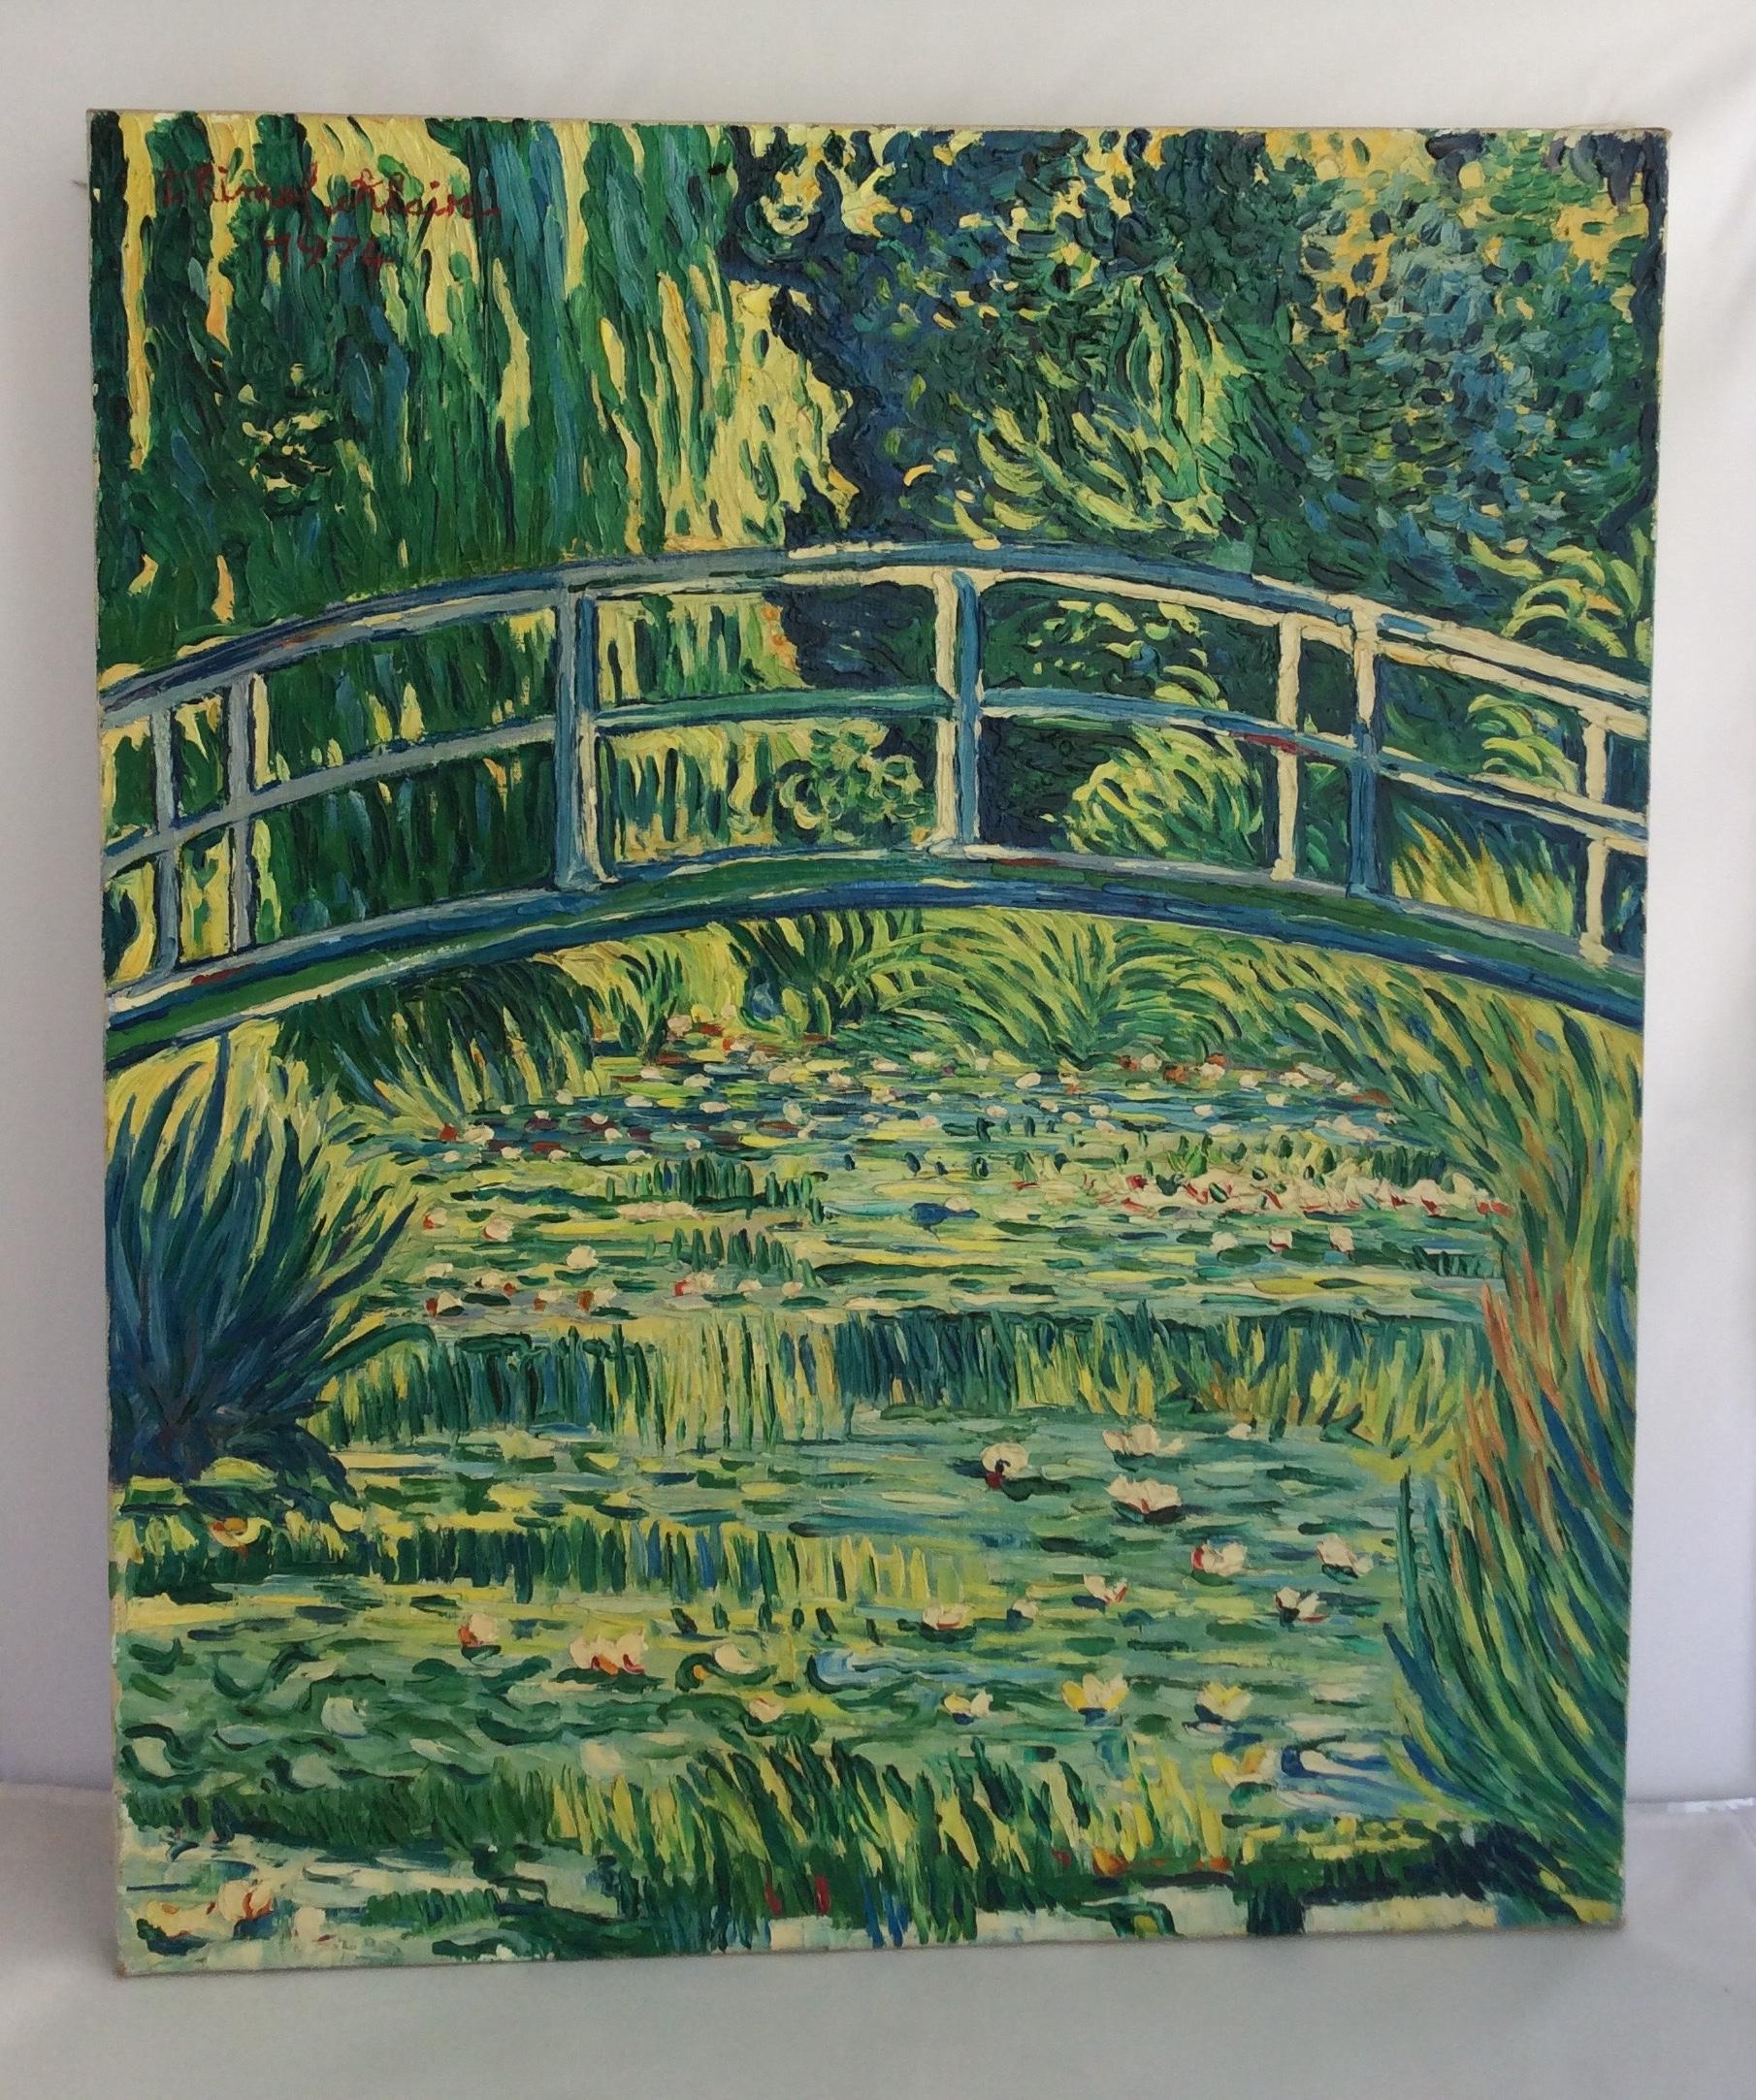 Canvas French Post Impressionist Painting After Monet, Signed Alain Thimel